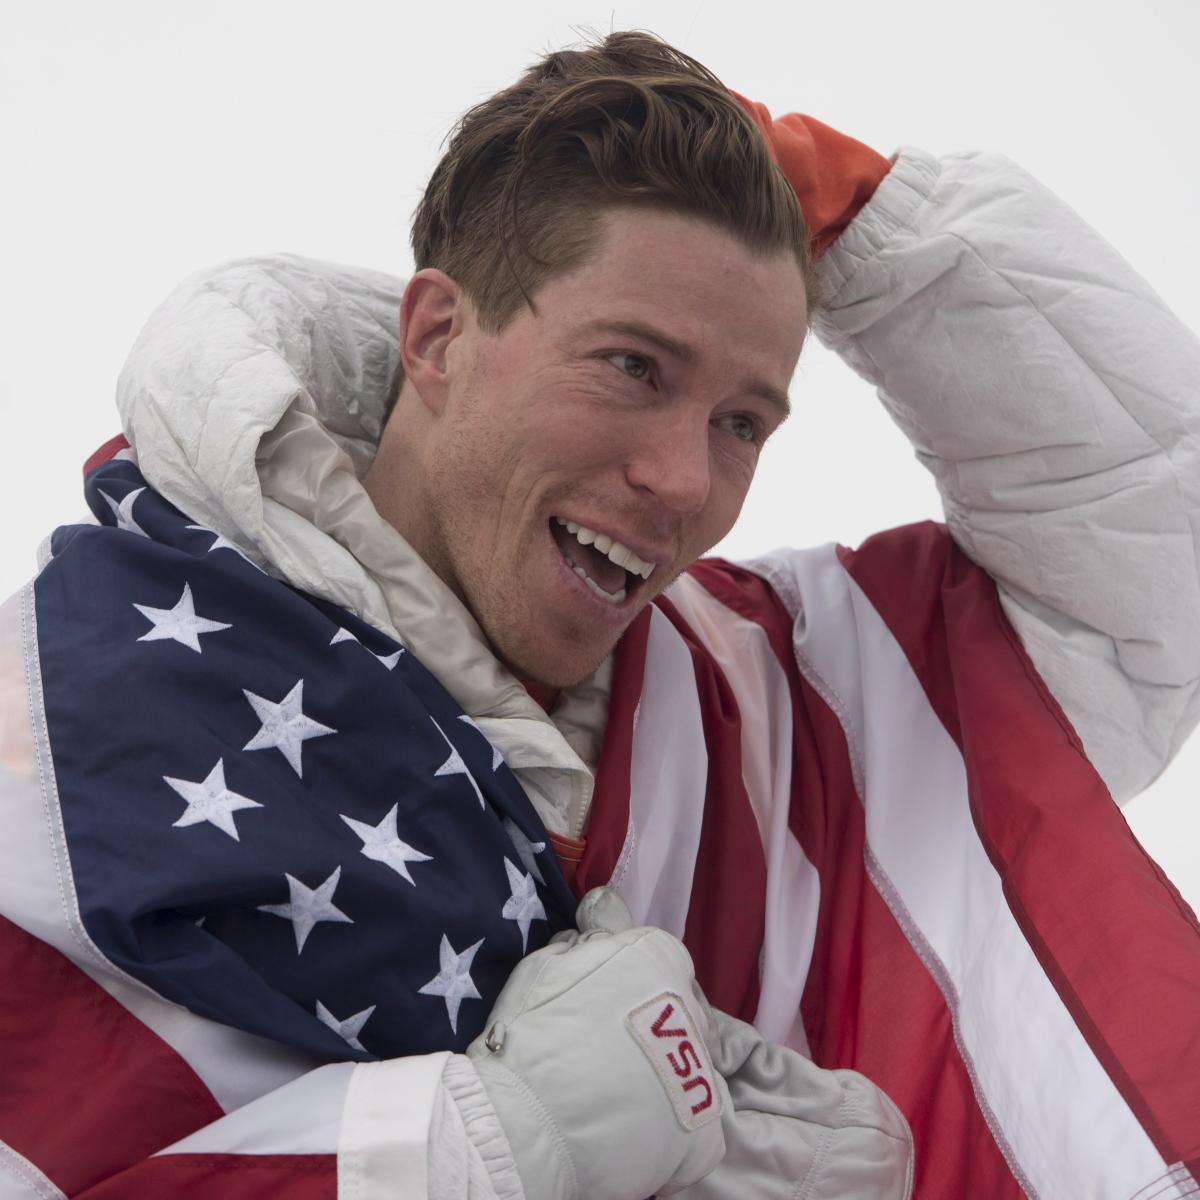 Video: Shaun White shares Carrot Top's advice that made him cut